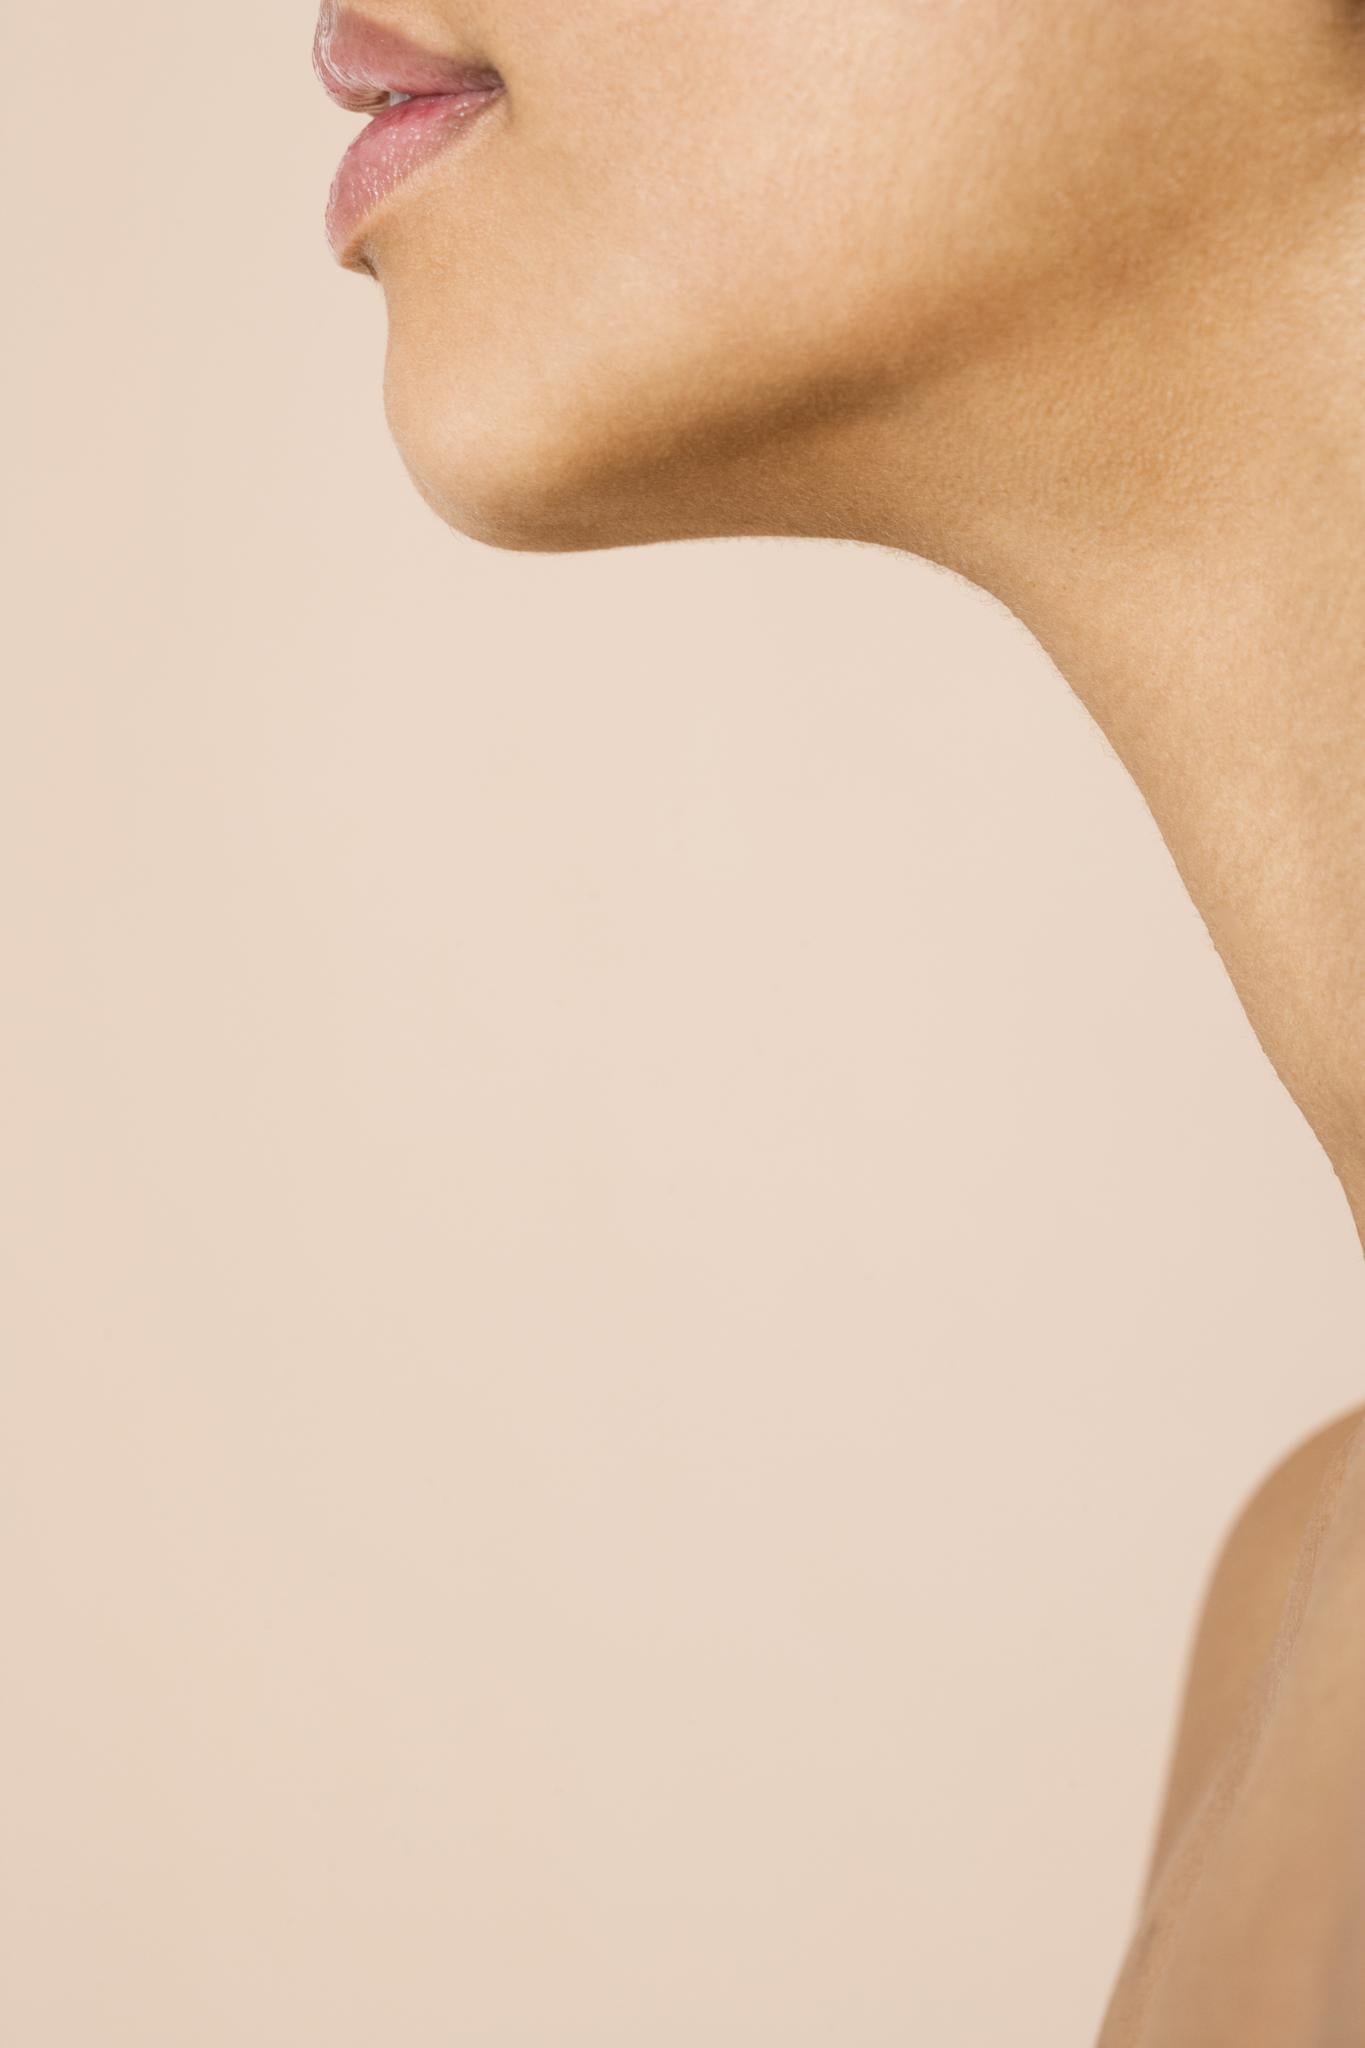 Neck Contouring is Proof That We've Gone Too Far